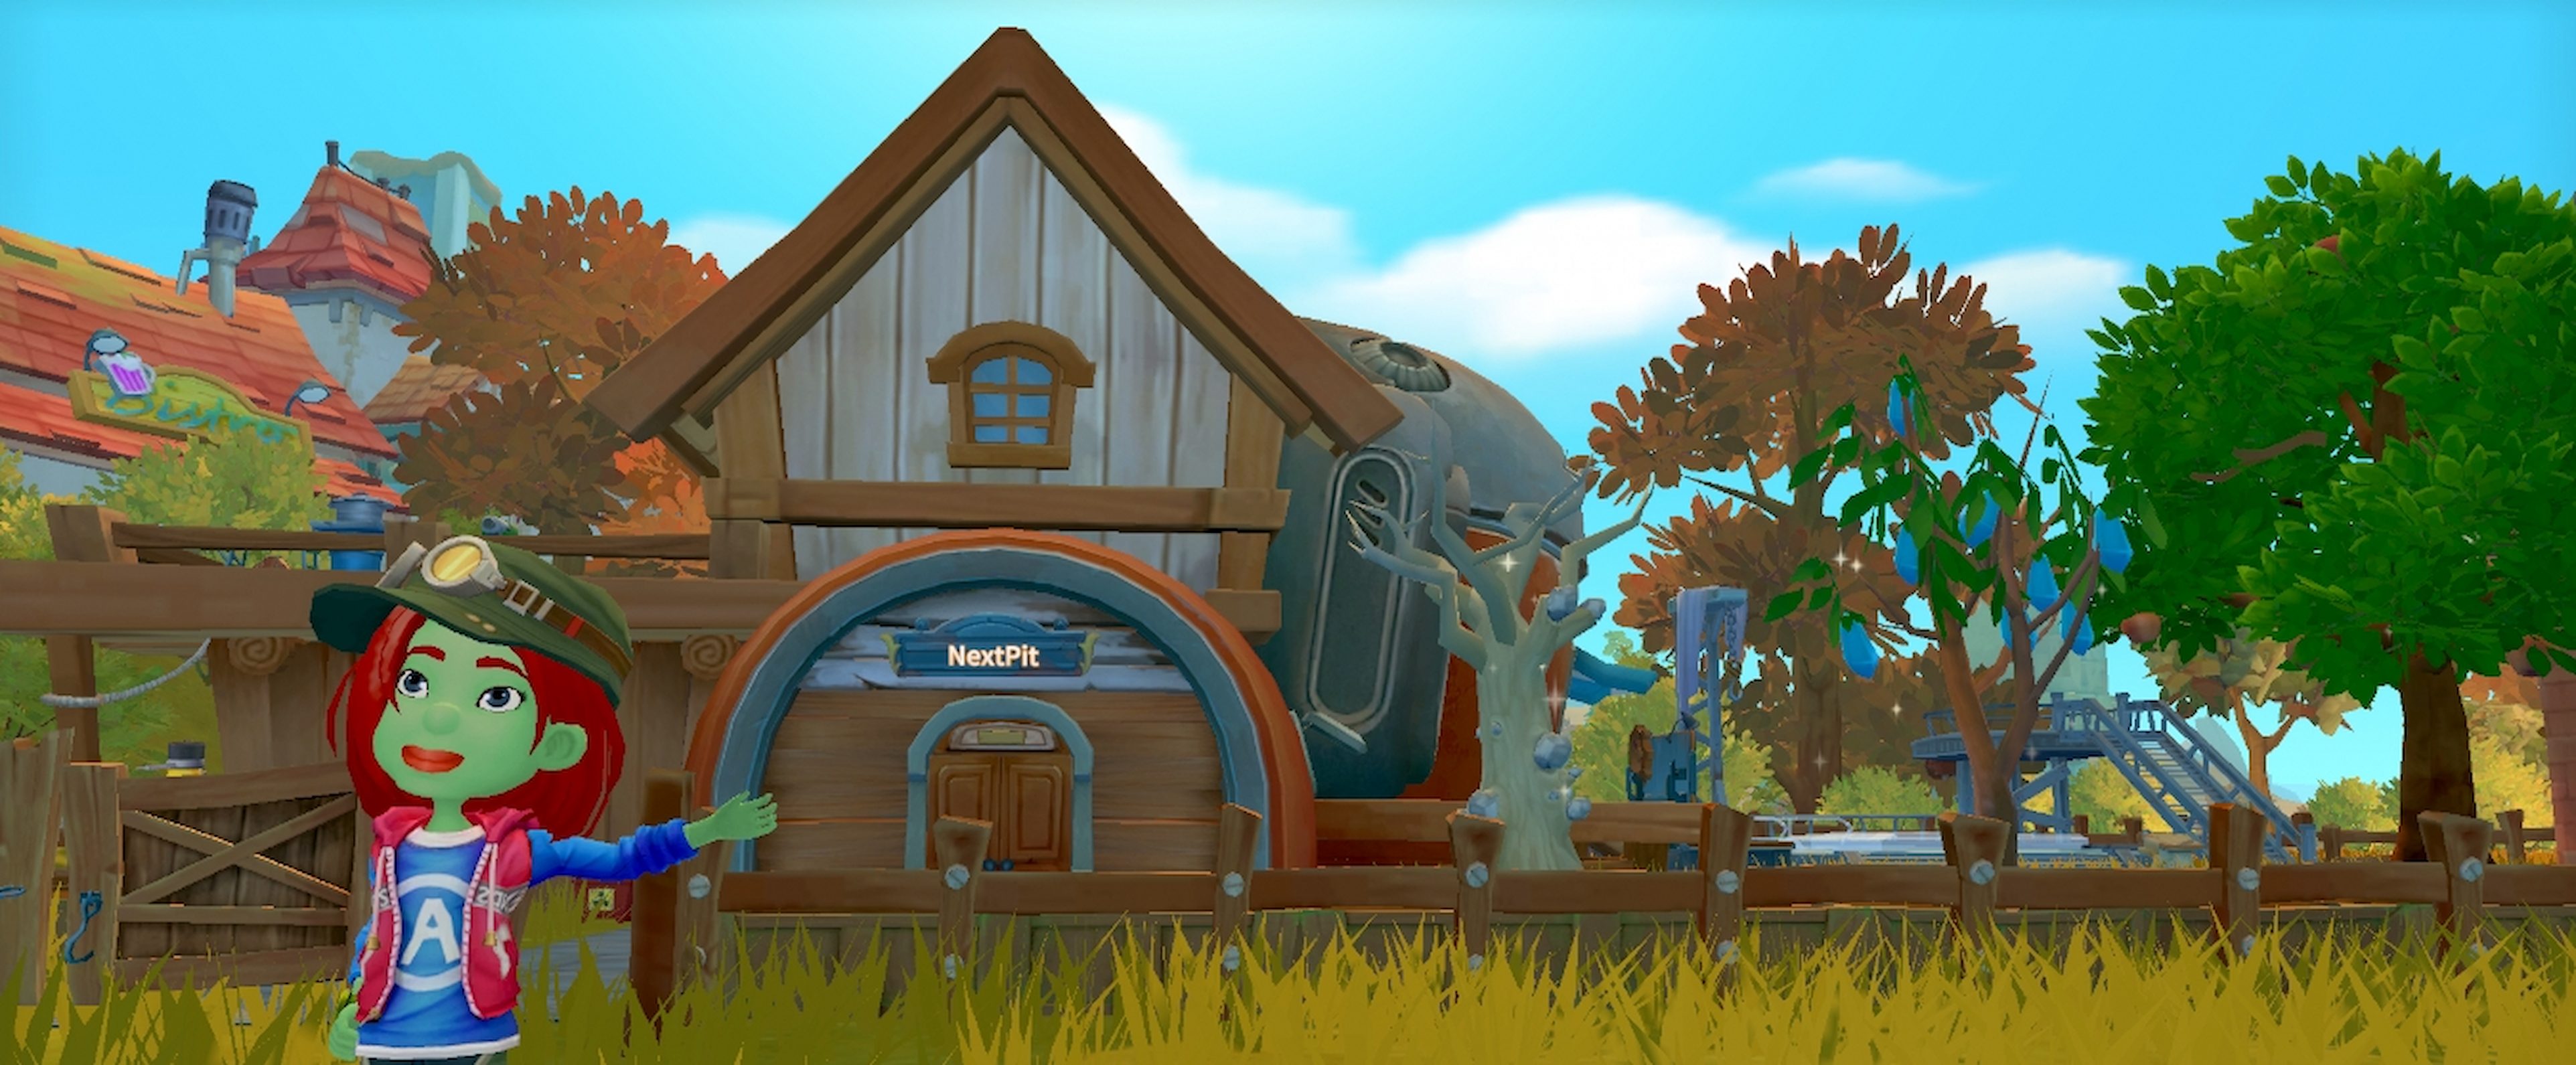 My Time at Portia review: Our August Android/iOS game of the month